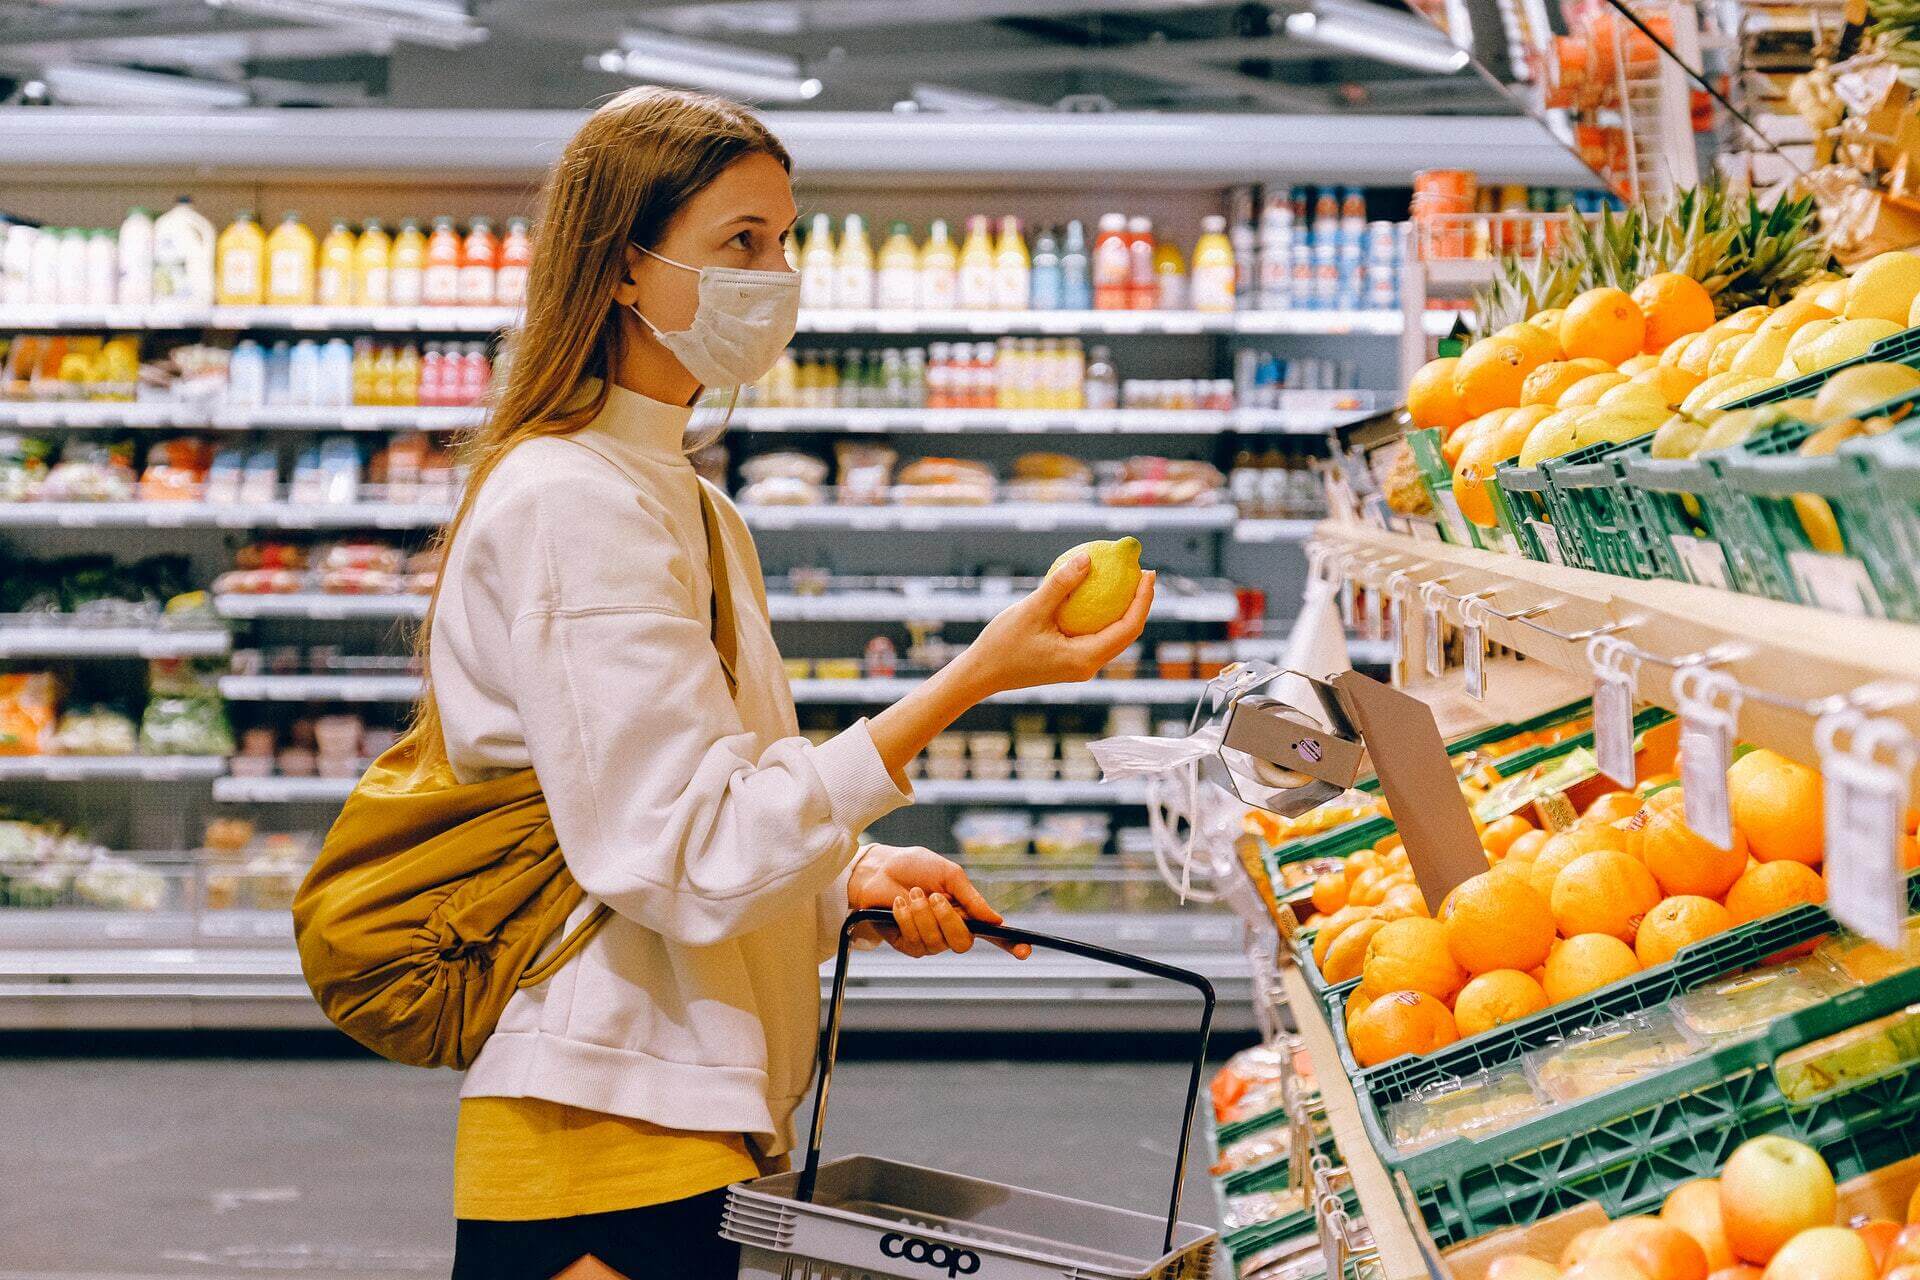 A women in a yellow t-shirt and beige jacket holding a fruit at the grocery store